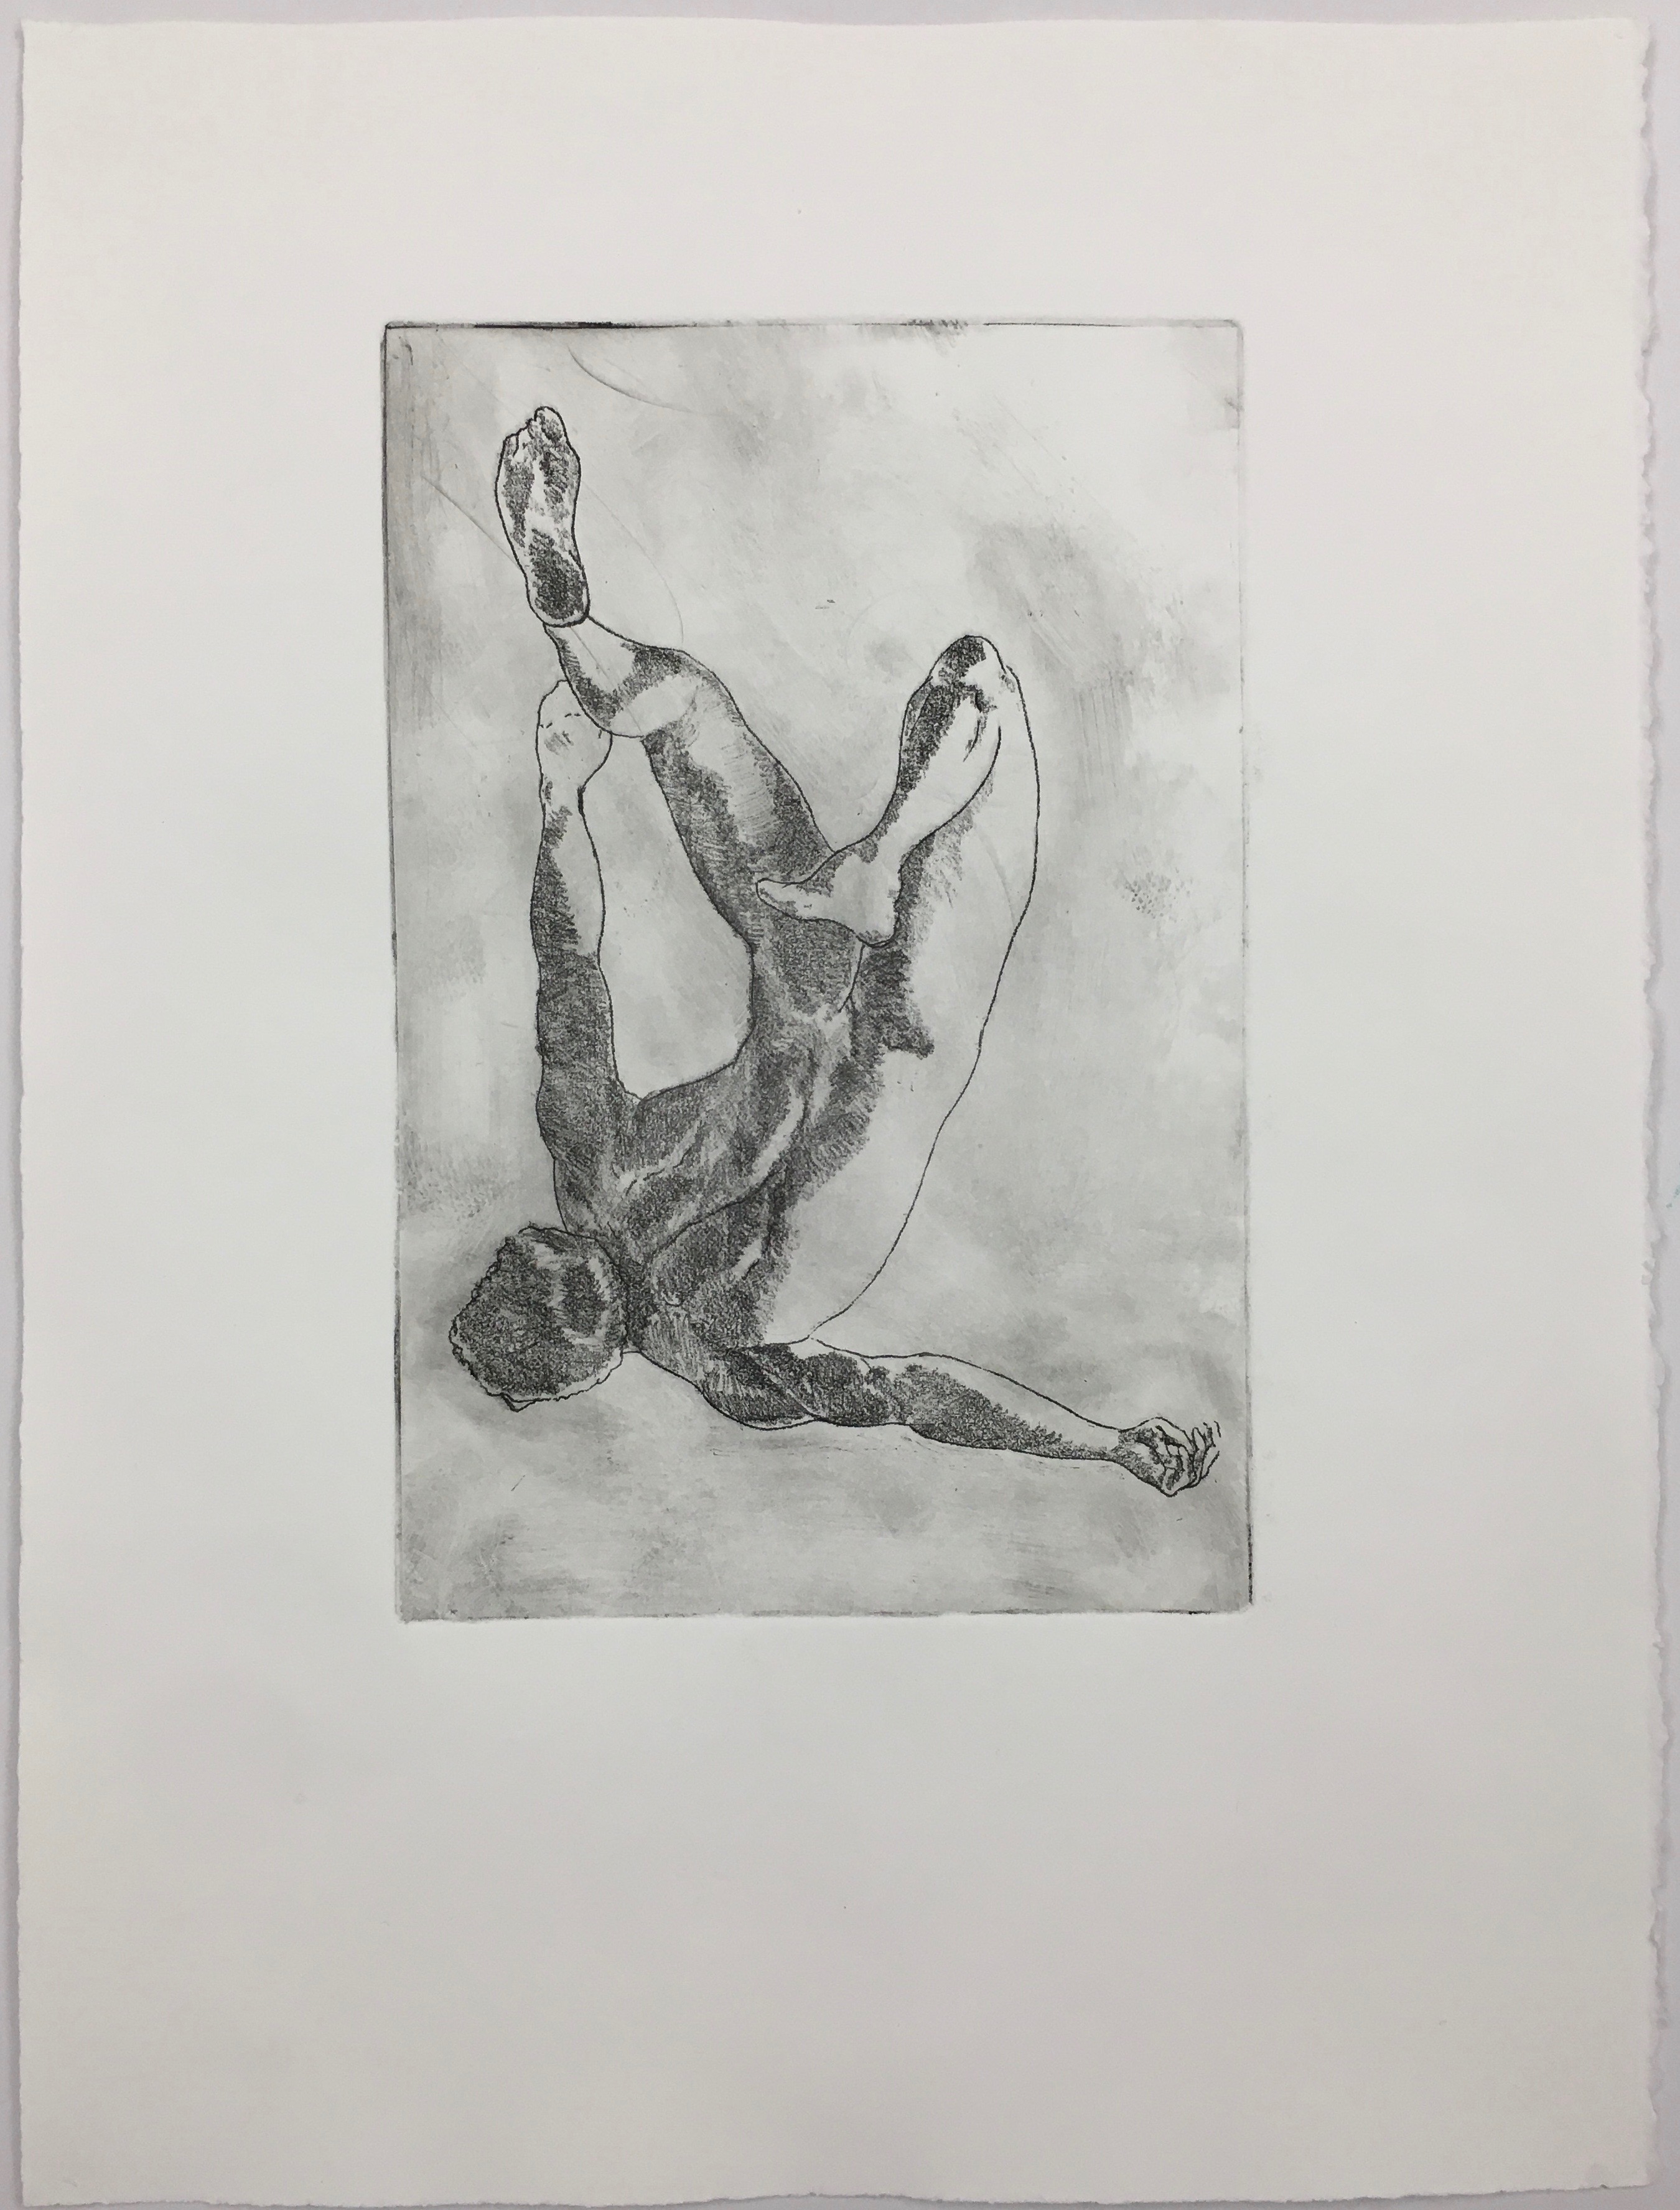 Failed Attempts in the Act of Falling Up: Attempt No. 6, #3, 2019.
                Monoprint on top of etching on soft ground, 9” x 6” by Karl Daum